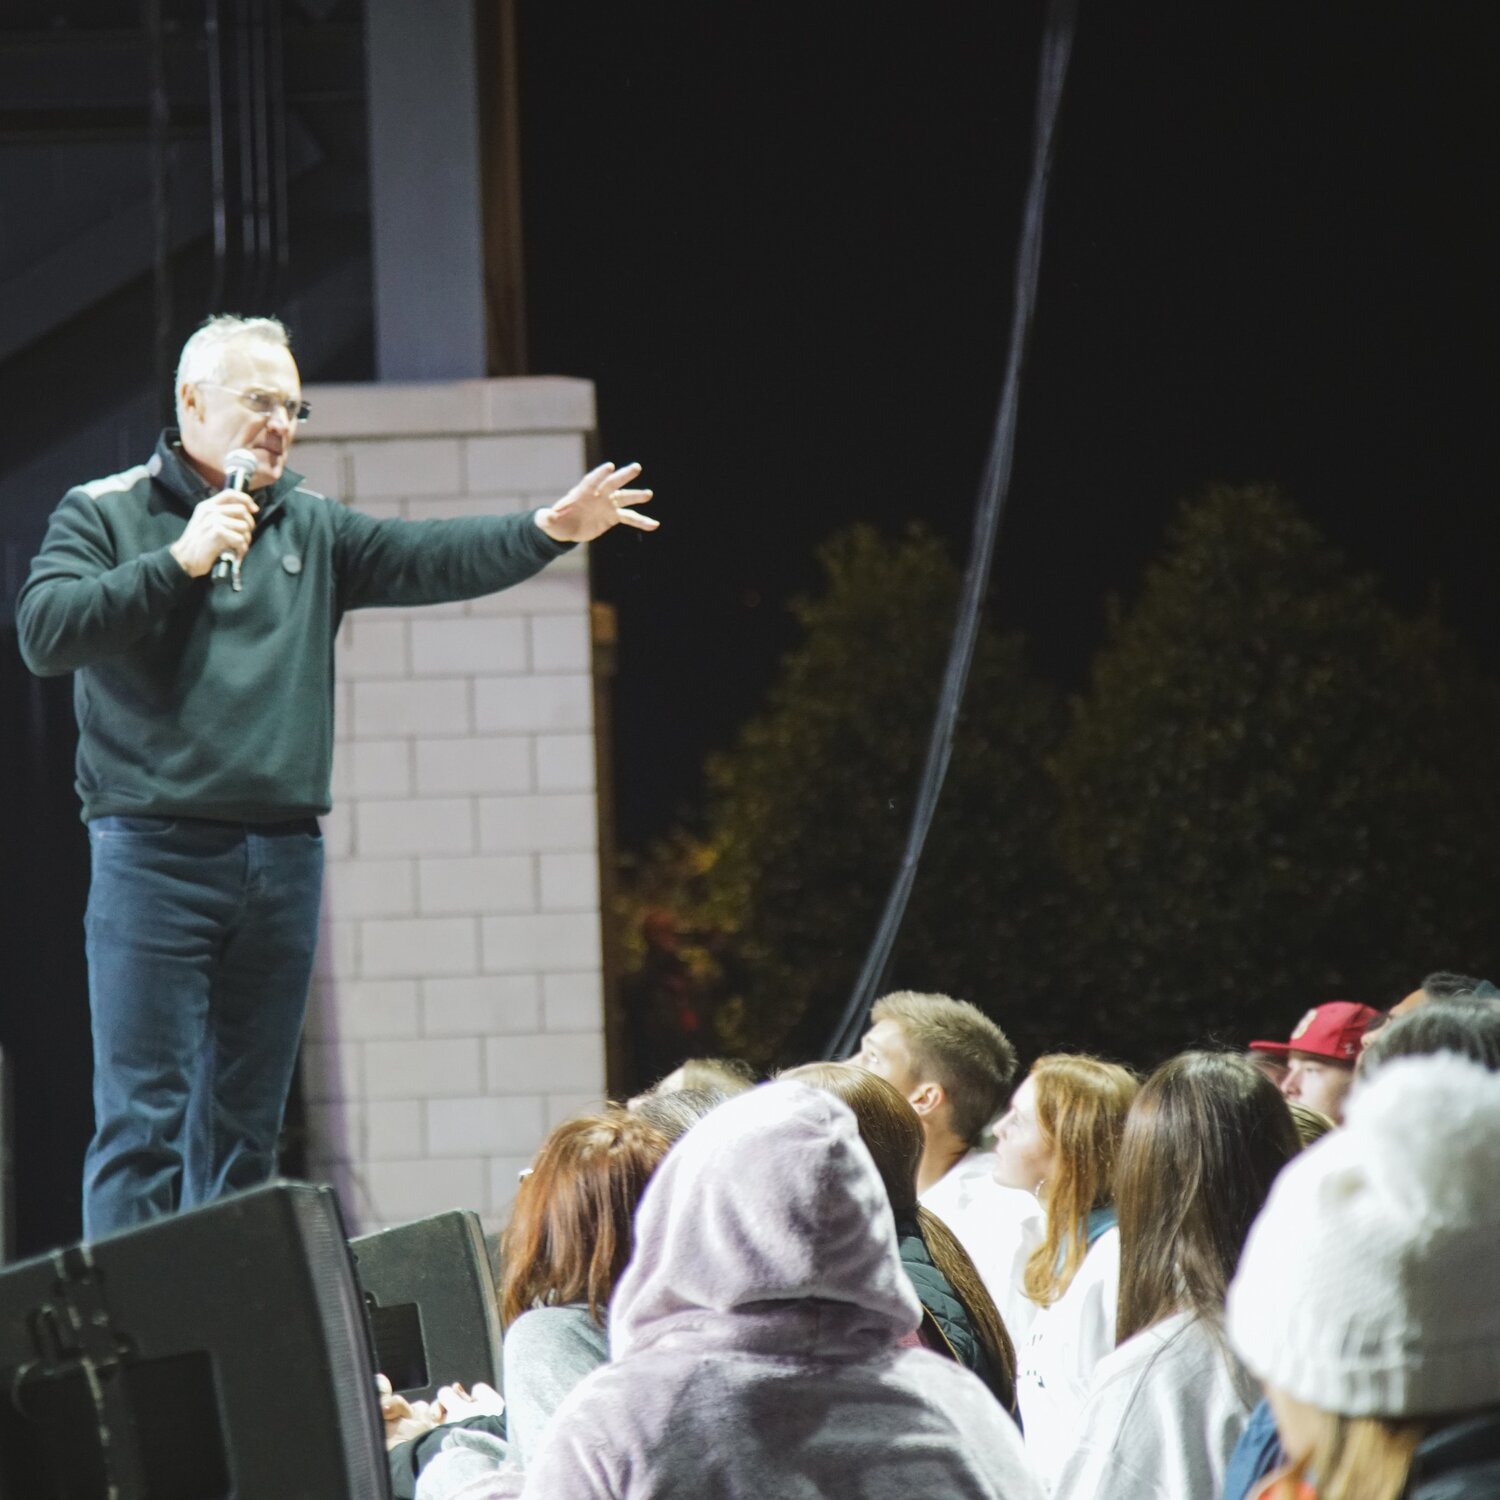 Georgia-based evangelist Rick Gage invites people to receive Christ as their Savior at an evangelistic event in Mississippi. (Photo/GO TELL Ministries)